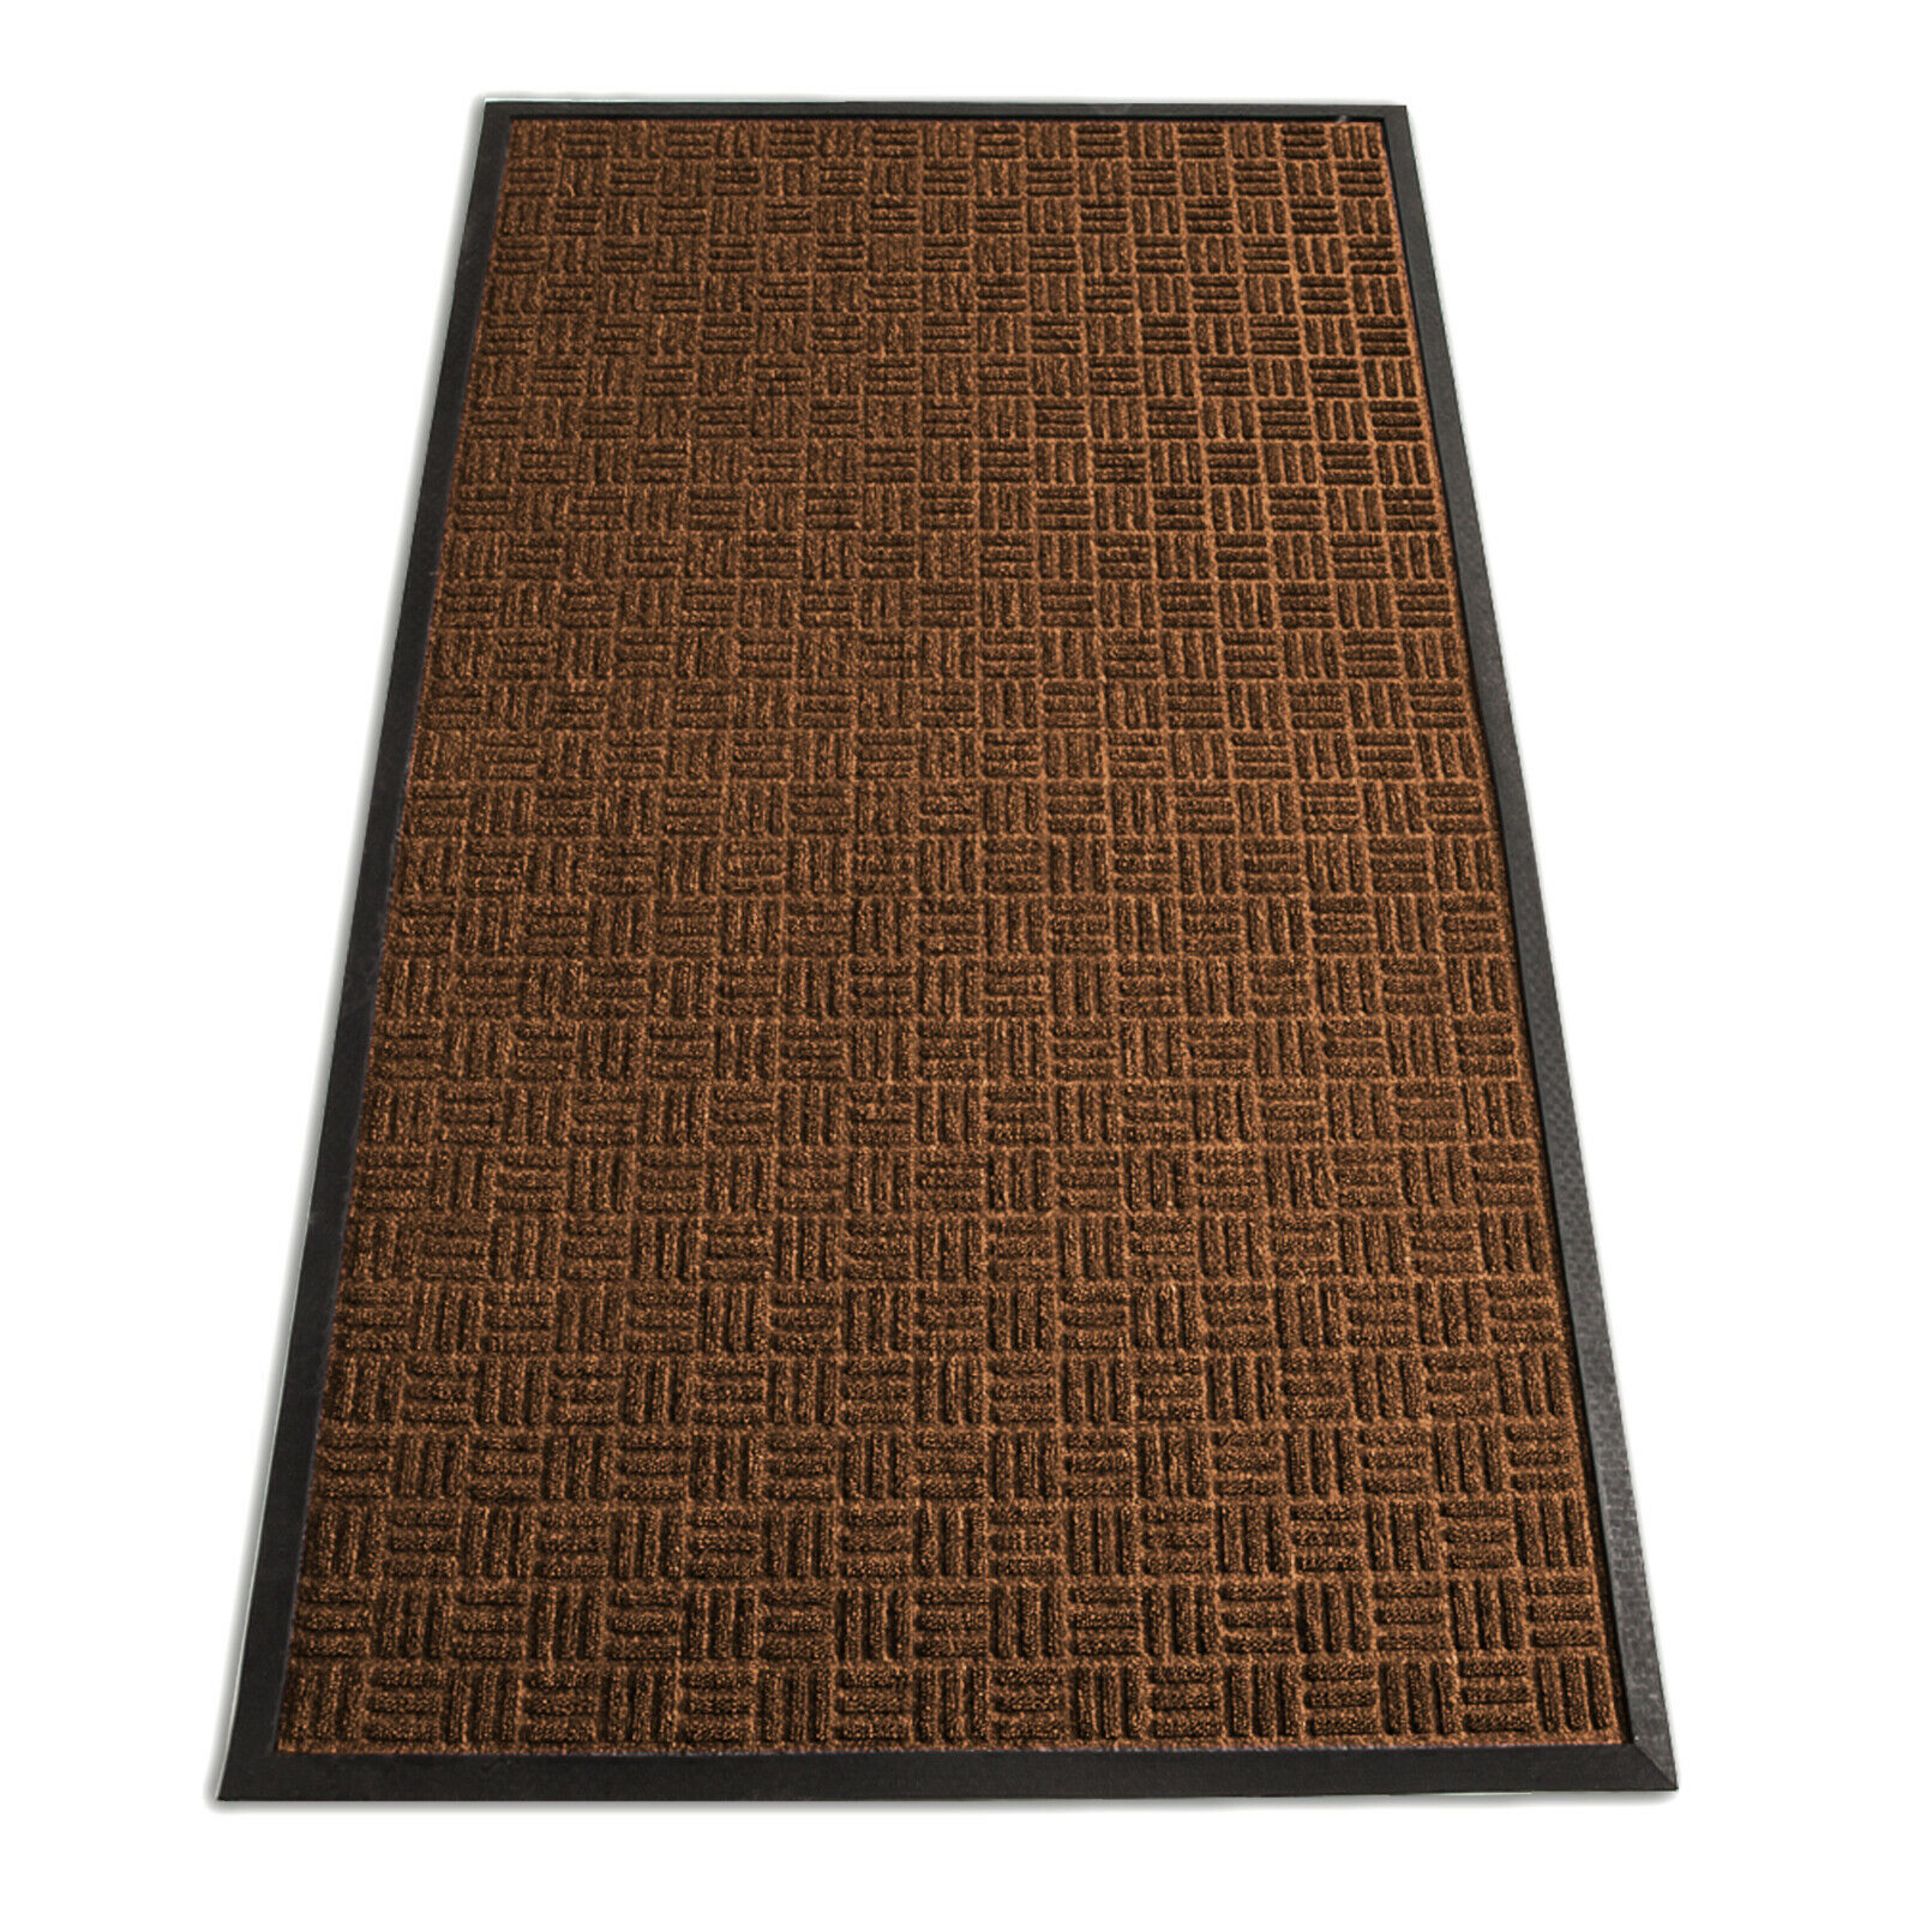 + VAT Brand New Heavy Duty Brown Entrance Mat - Also For Residential Use - Approx 6ft x 4ft - Non